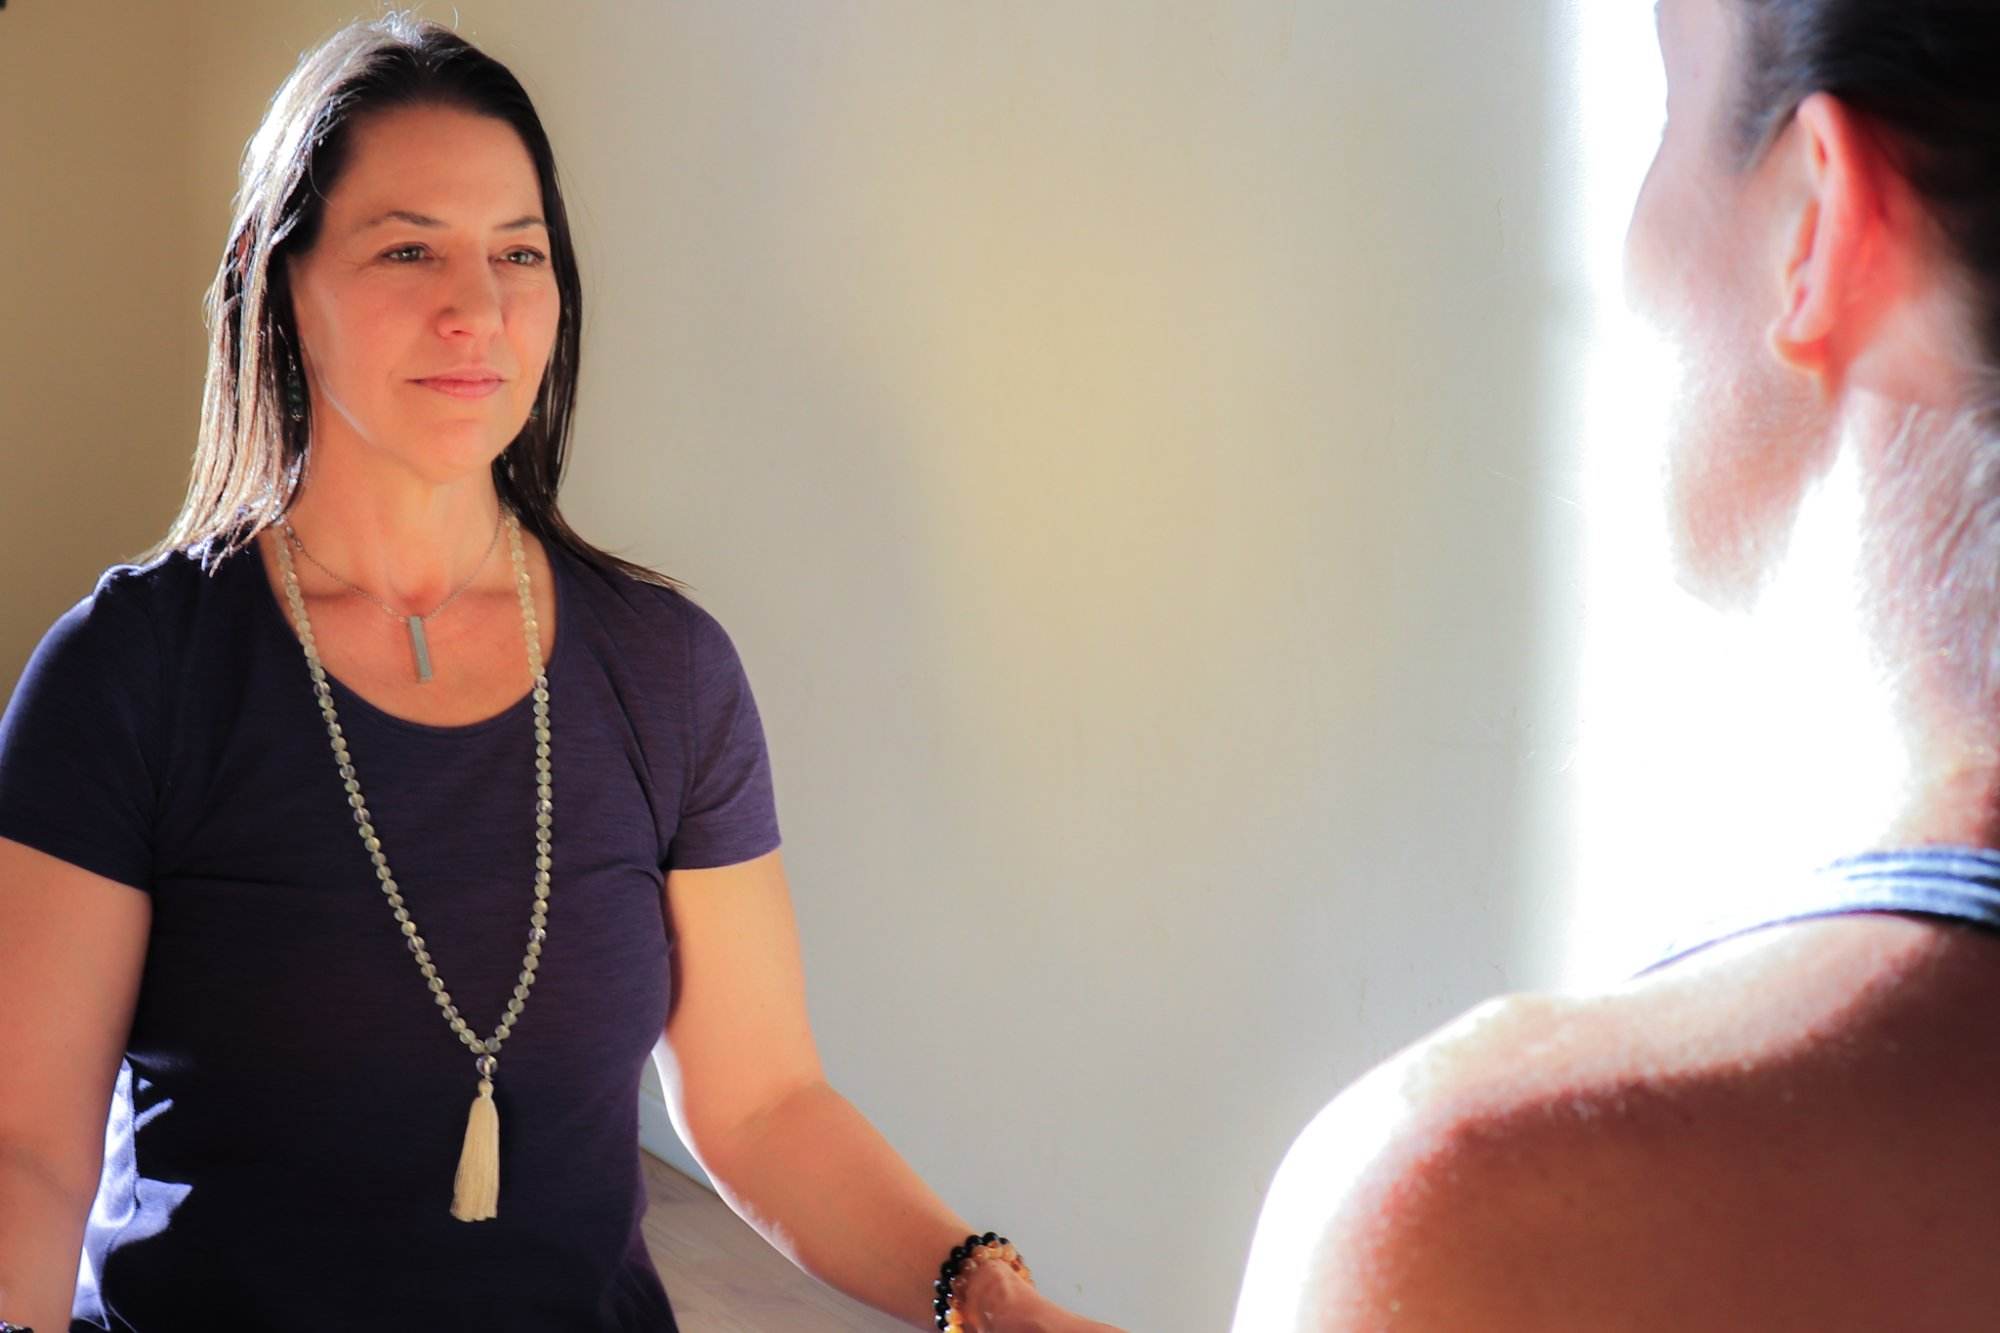 Yoga therapist, white woman in her 40s and shoulder-length brown hair observers her client, a white woman in her 30s as she notices her breath.